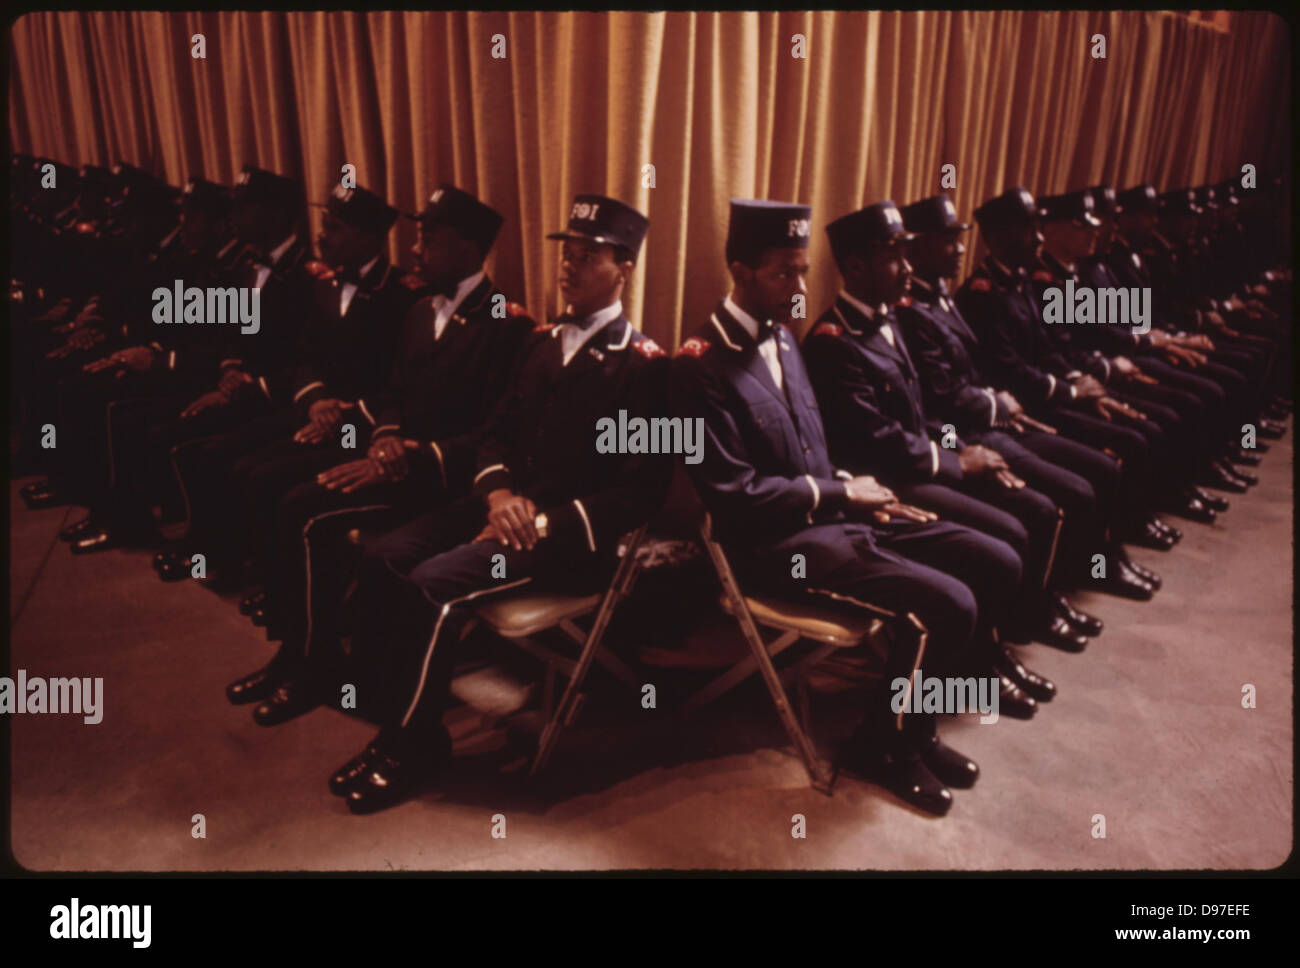 'The Fruit Of Islam', A Special Group Of Bodyguards For Muslim Leader Elijah Muhammad, Sit At The Bottom Of The Platform While H Stock Photo